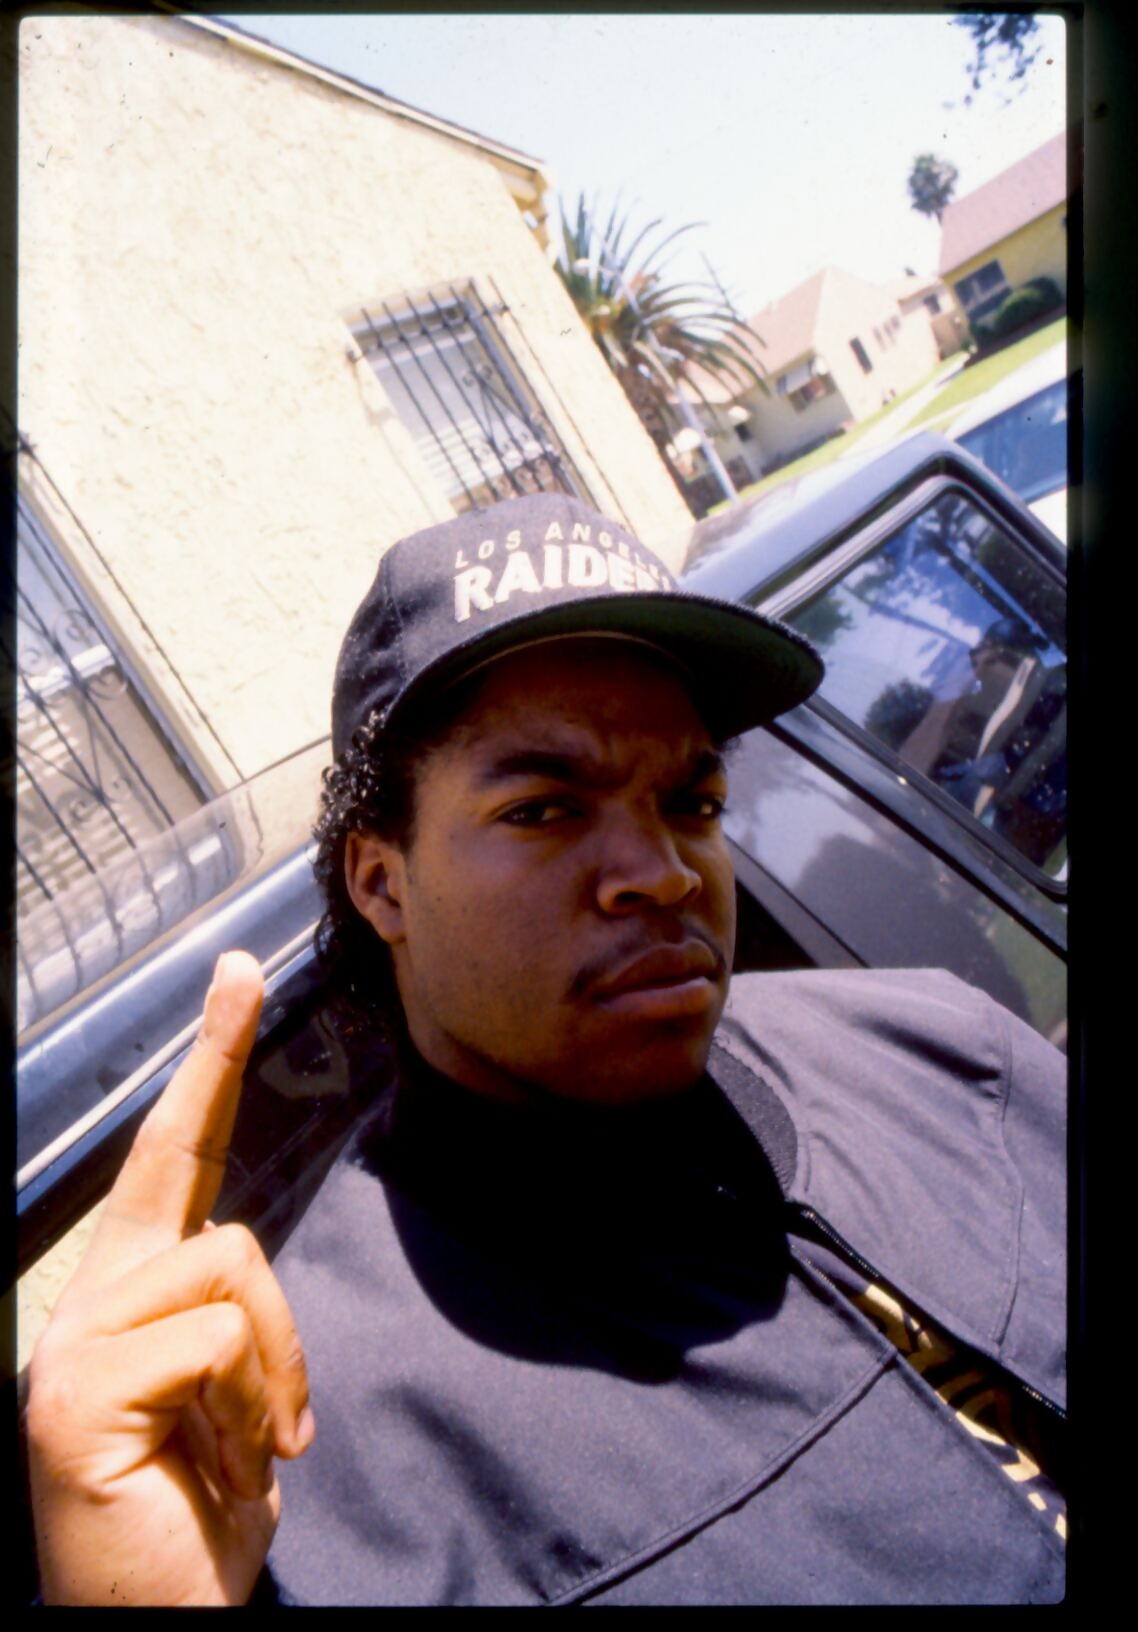 Ice Cube outside his mother's house in Compton, California, following his split from rap group NWA (Copyright: Normski)